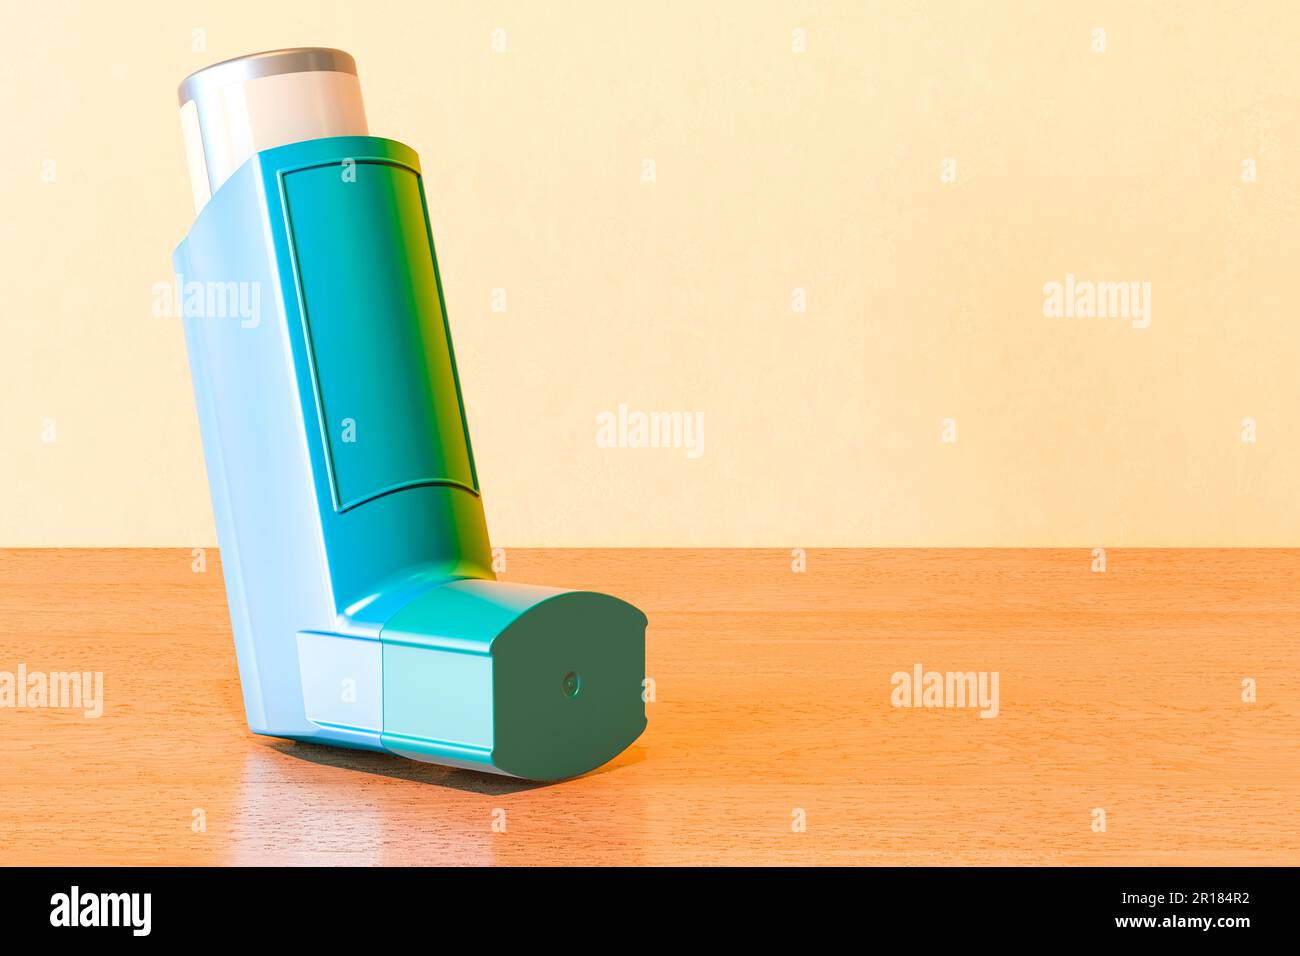 Metered-dose inhaler, MDI on the wooden table, 3D rendering Stock Photo